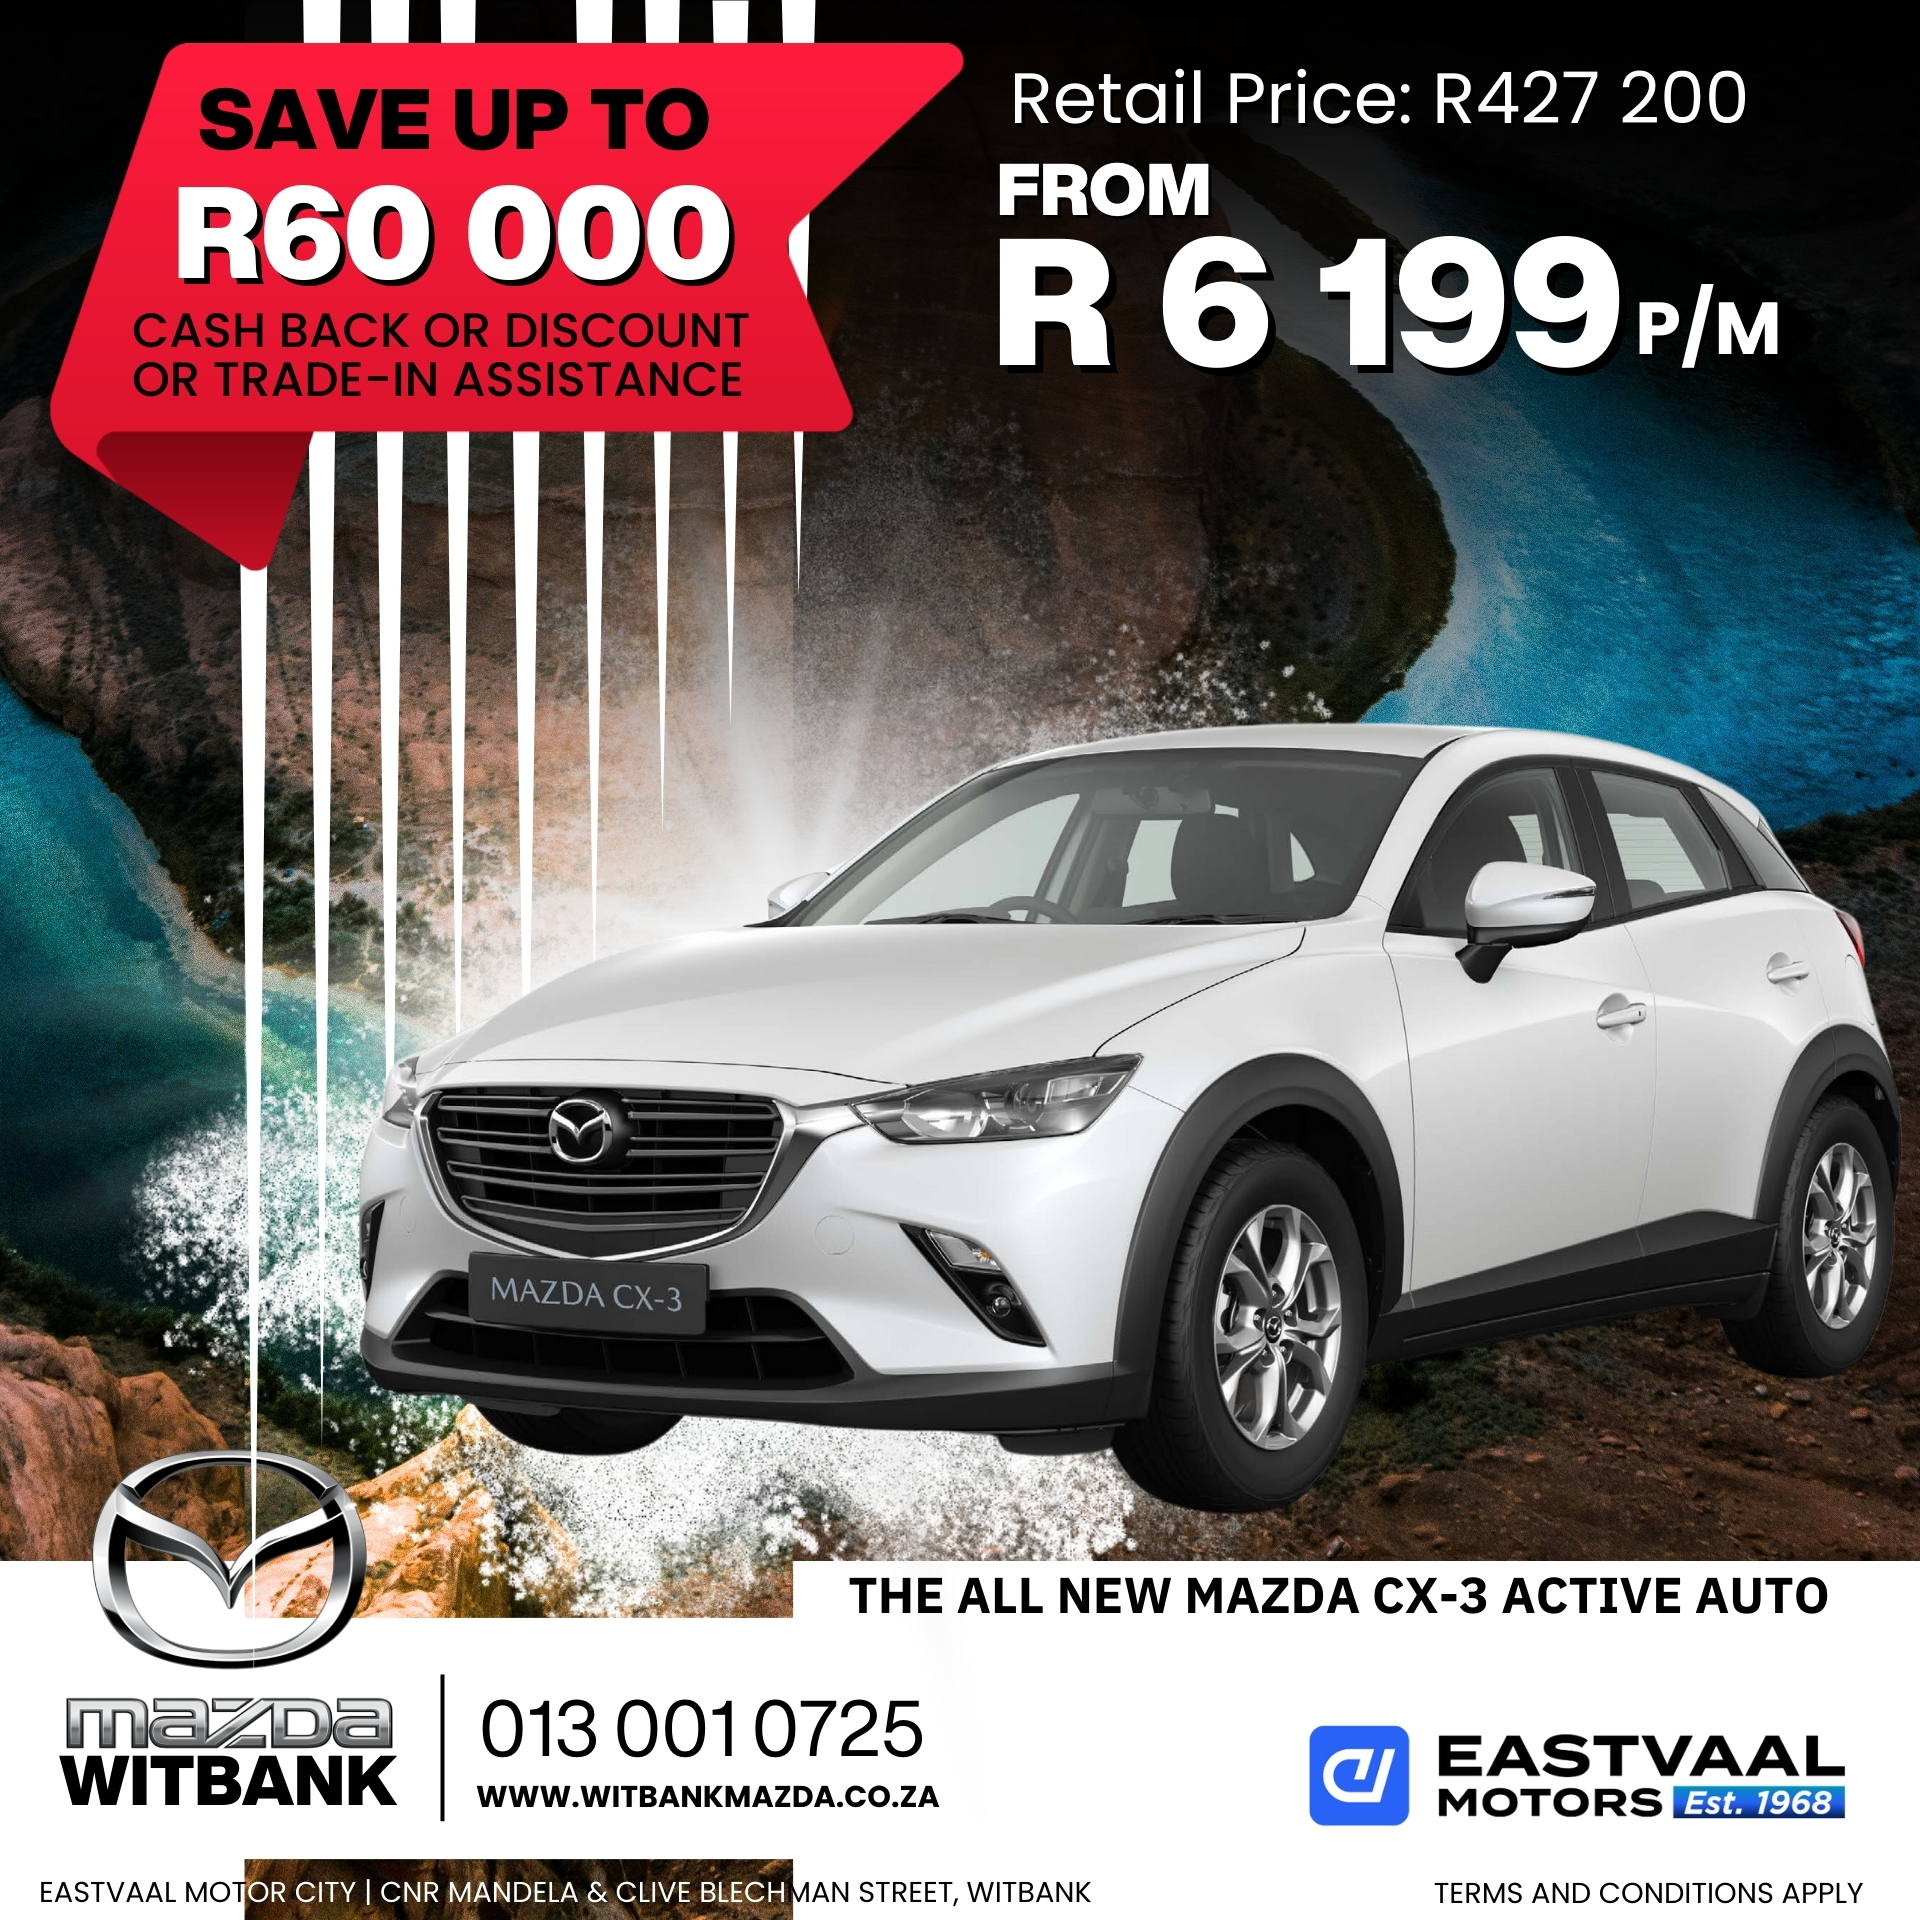 Experience the thrill of the road with Mazda this July. Visit Eastvaal Motor City for amazing deals and test drives! image from Eastvaal Motors